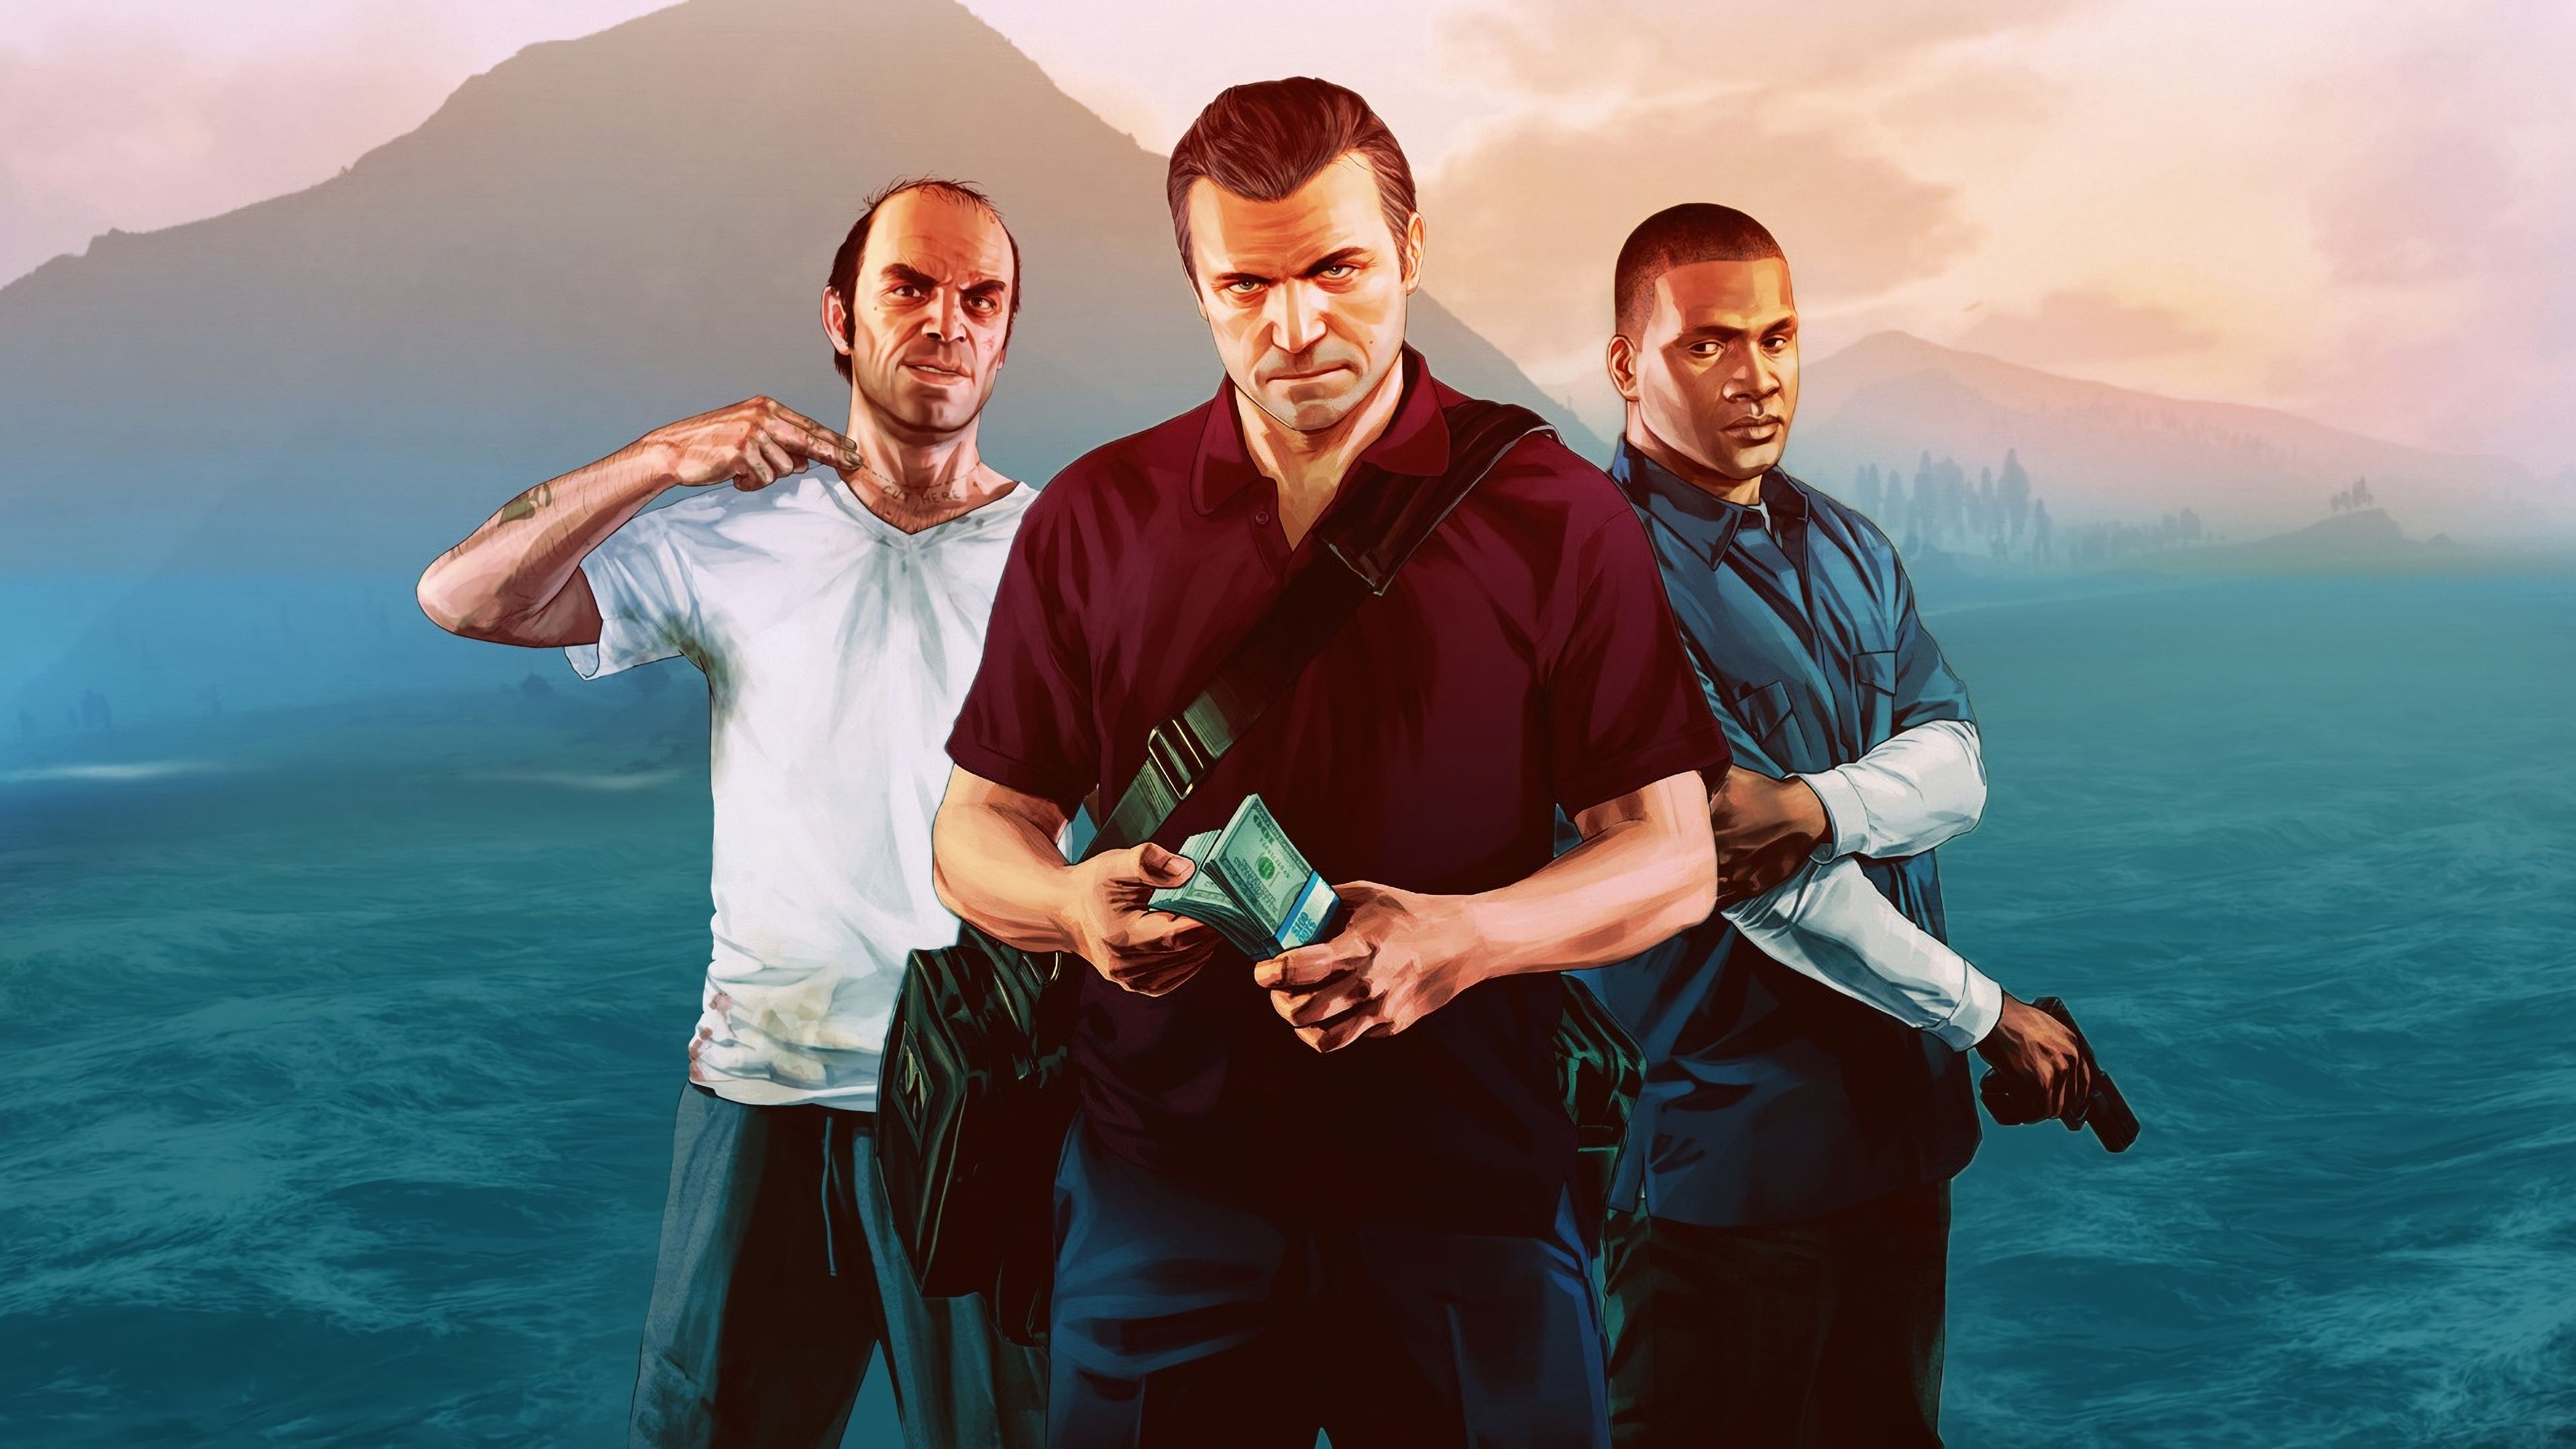 Trevor, Franklin and Michael in GTA 4K Wallpaper, HD Games 4K Wallpaper, Image, Photo and Background